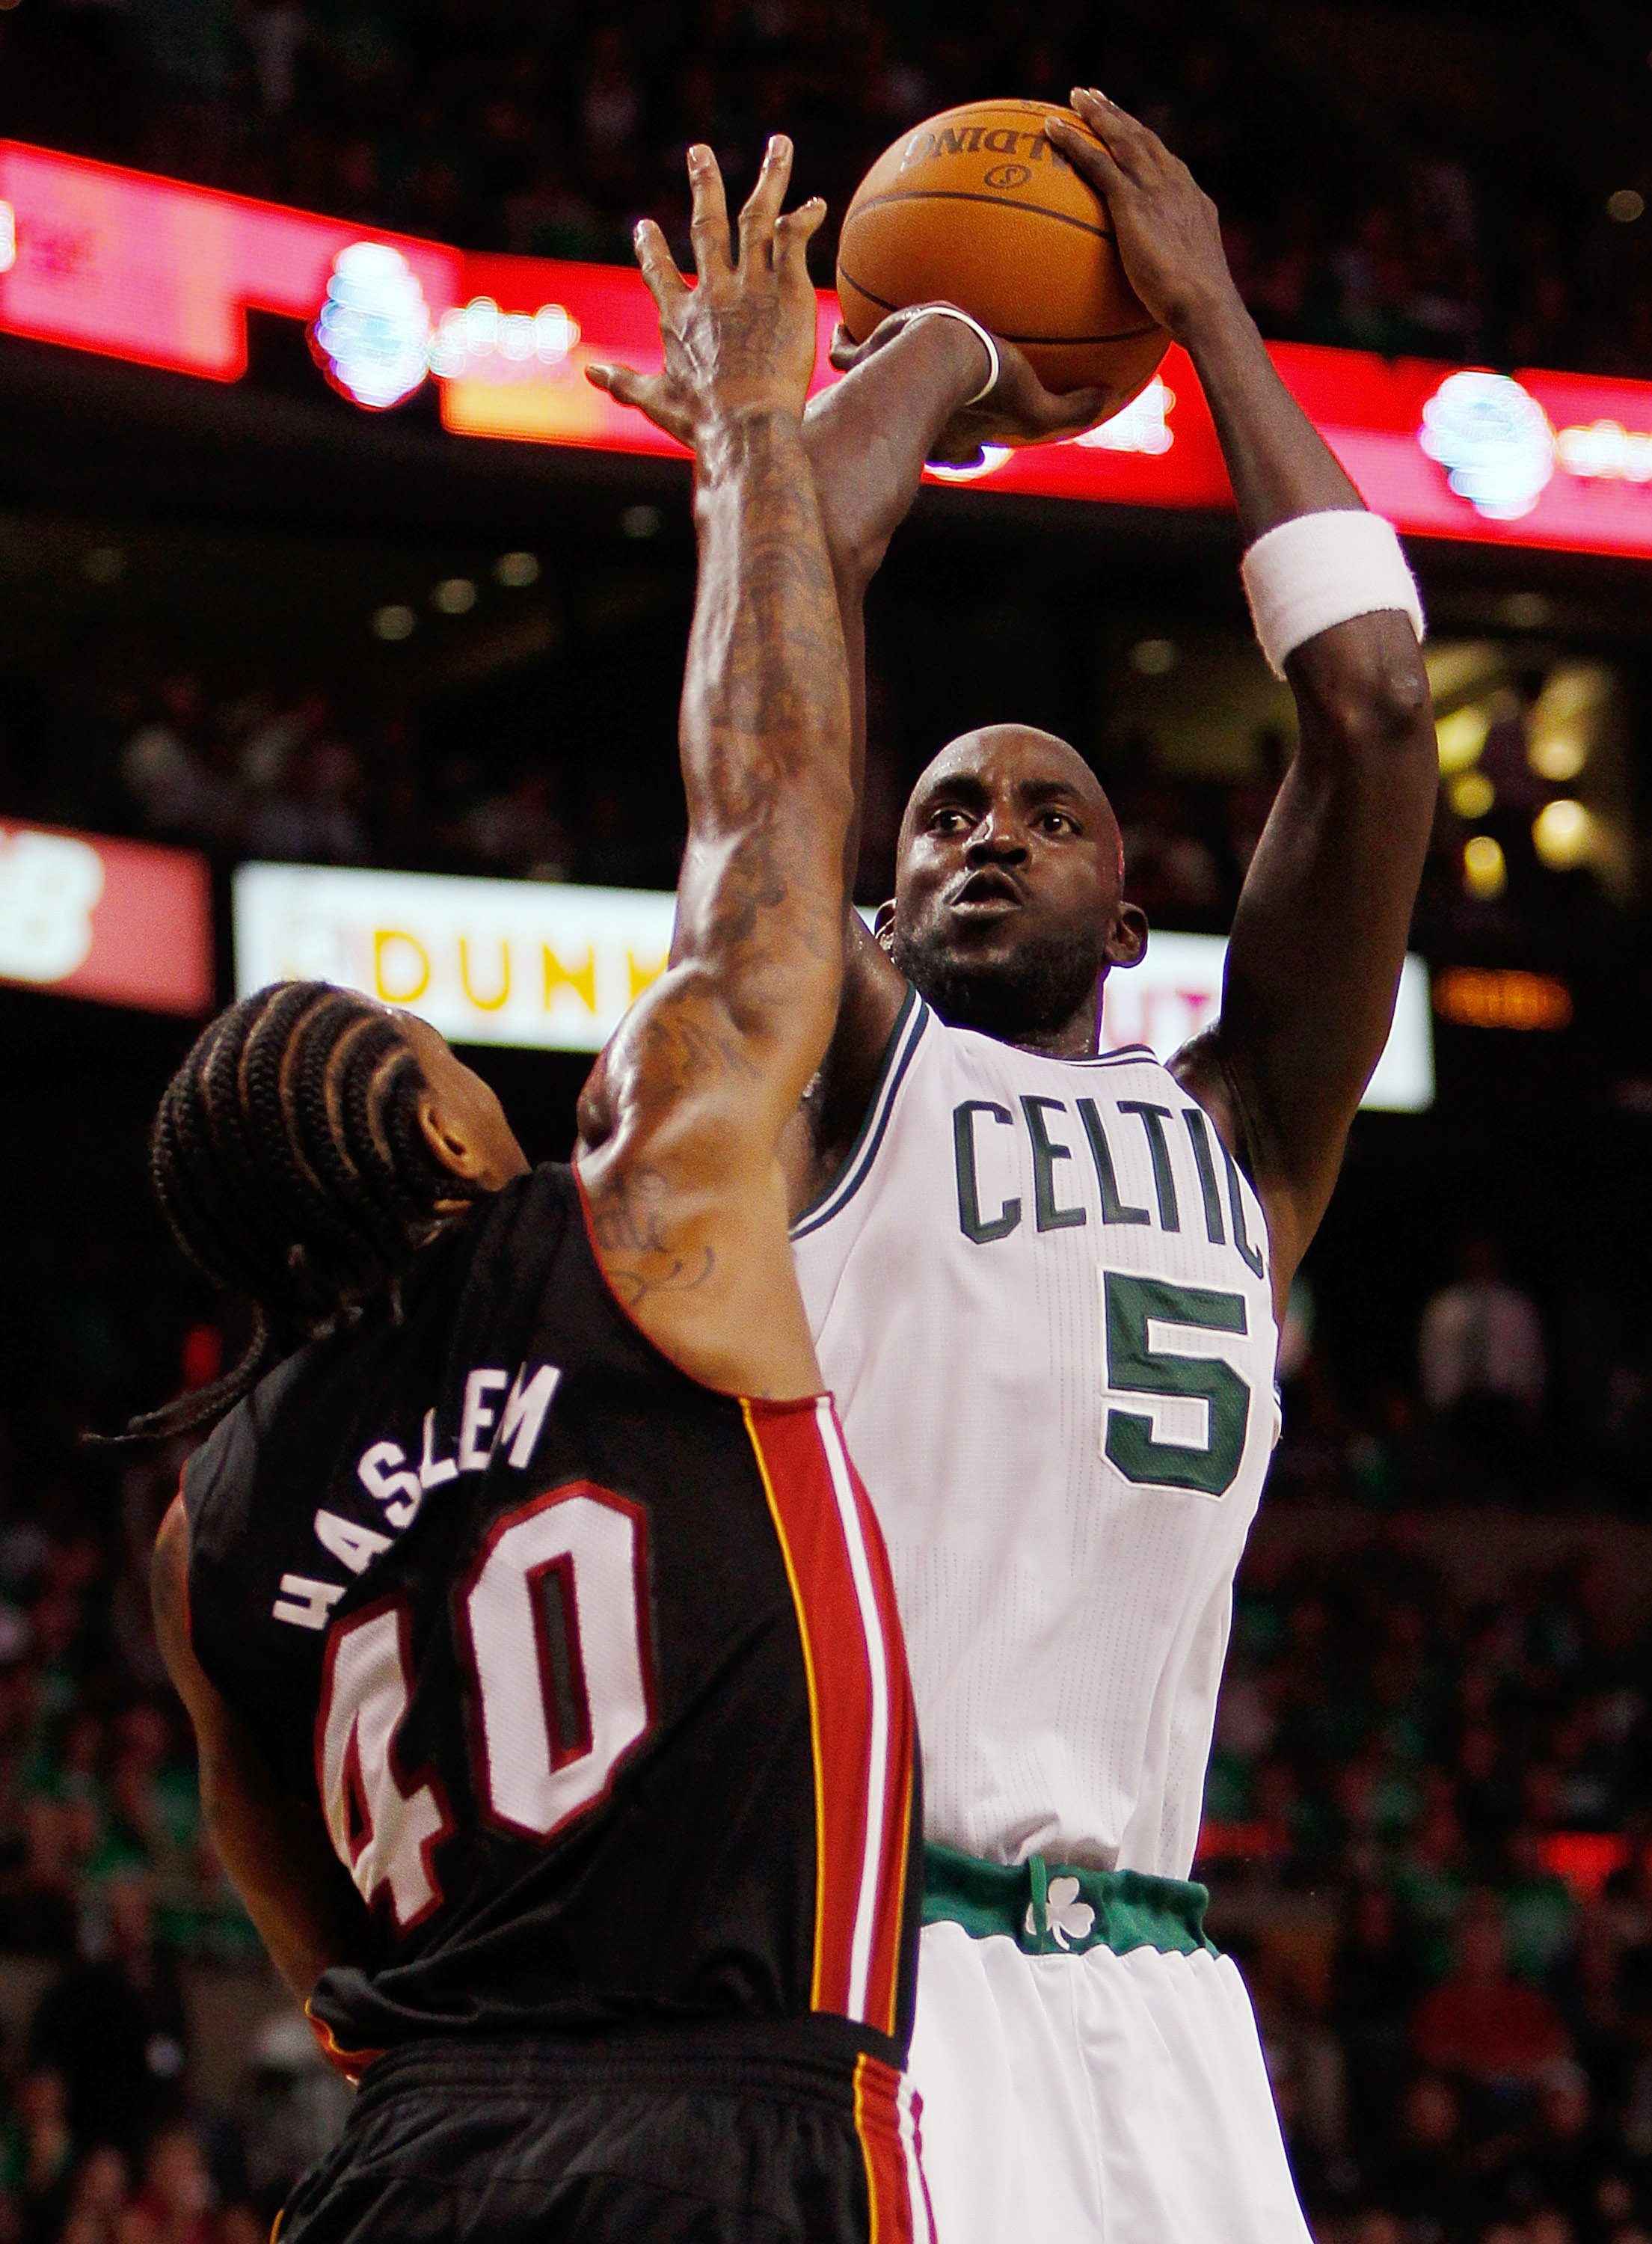 BOSTON, MA - OCTOBER 26: Kevin Garnett #5 of the Boston Celtics shots against the defense of Udonis Haslem #40 of the Miami Heat at the TD Banknorth Garden on October 26, 2010 in Boston, Massachusetts. NOTE TO USER: User expressly acknowledges and agrees